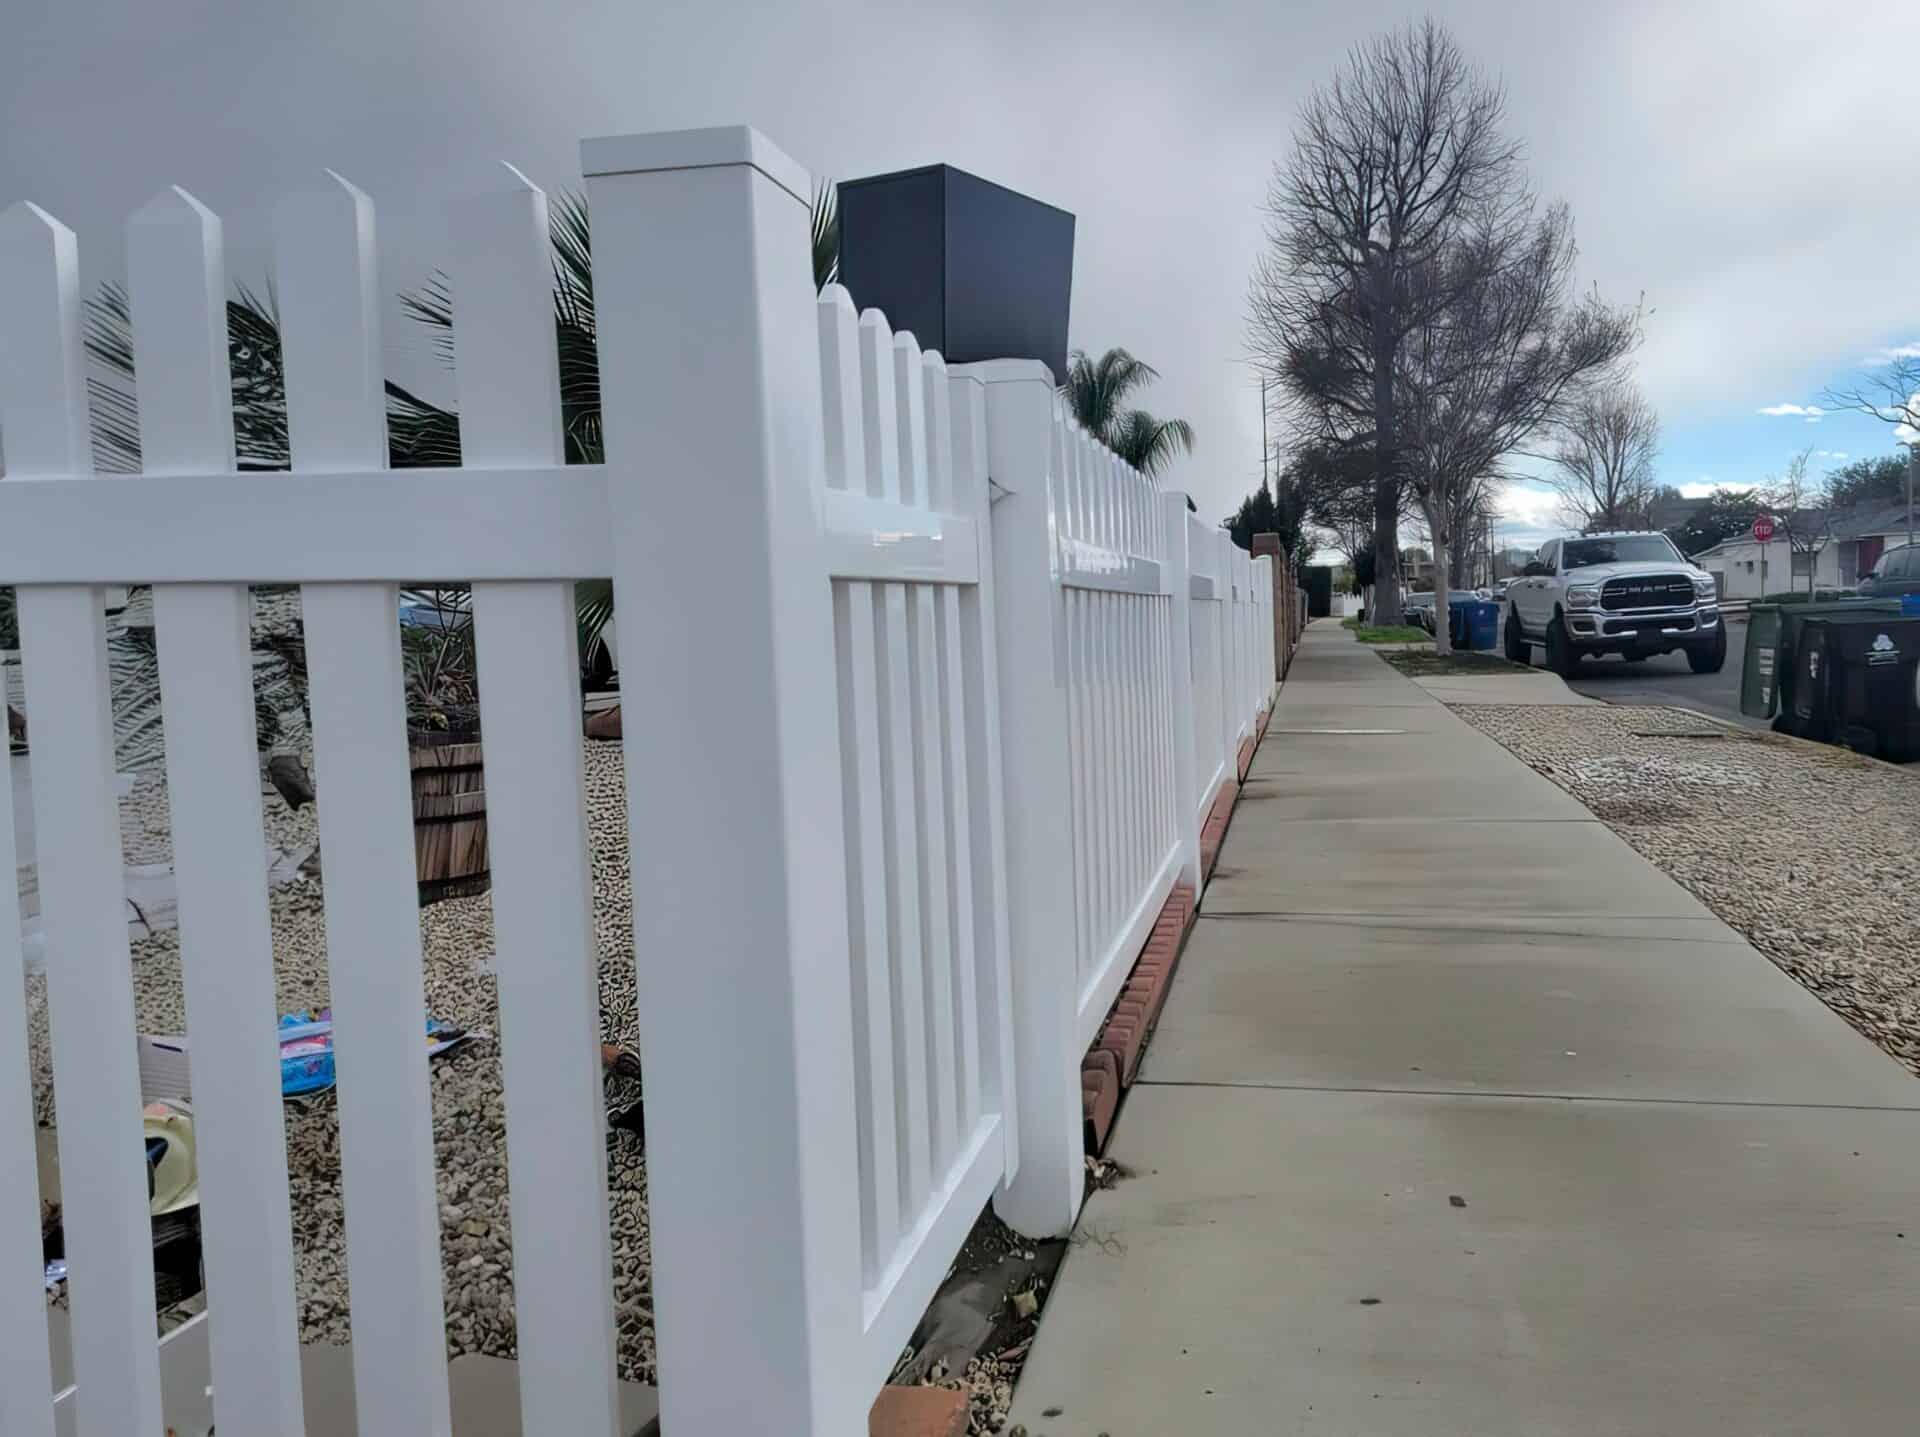 A White Vinyl Vertical Picket Fence lines the footpath alongside tall trees and a parked car.